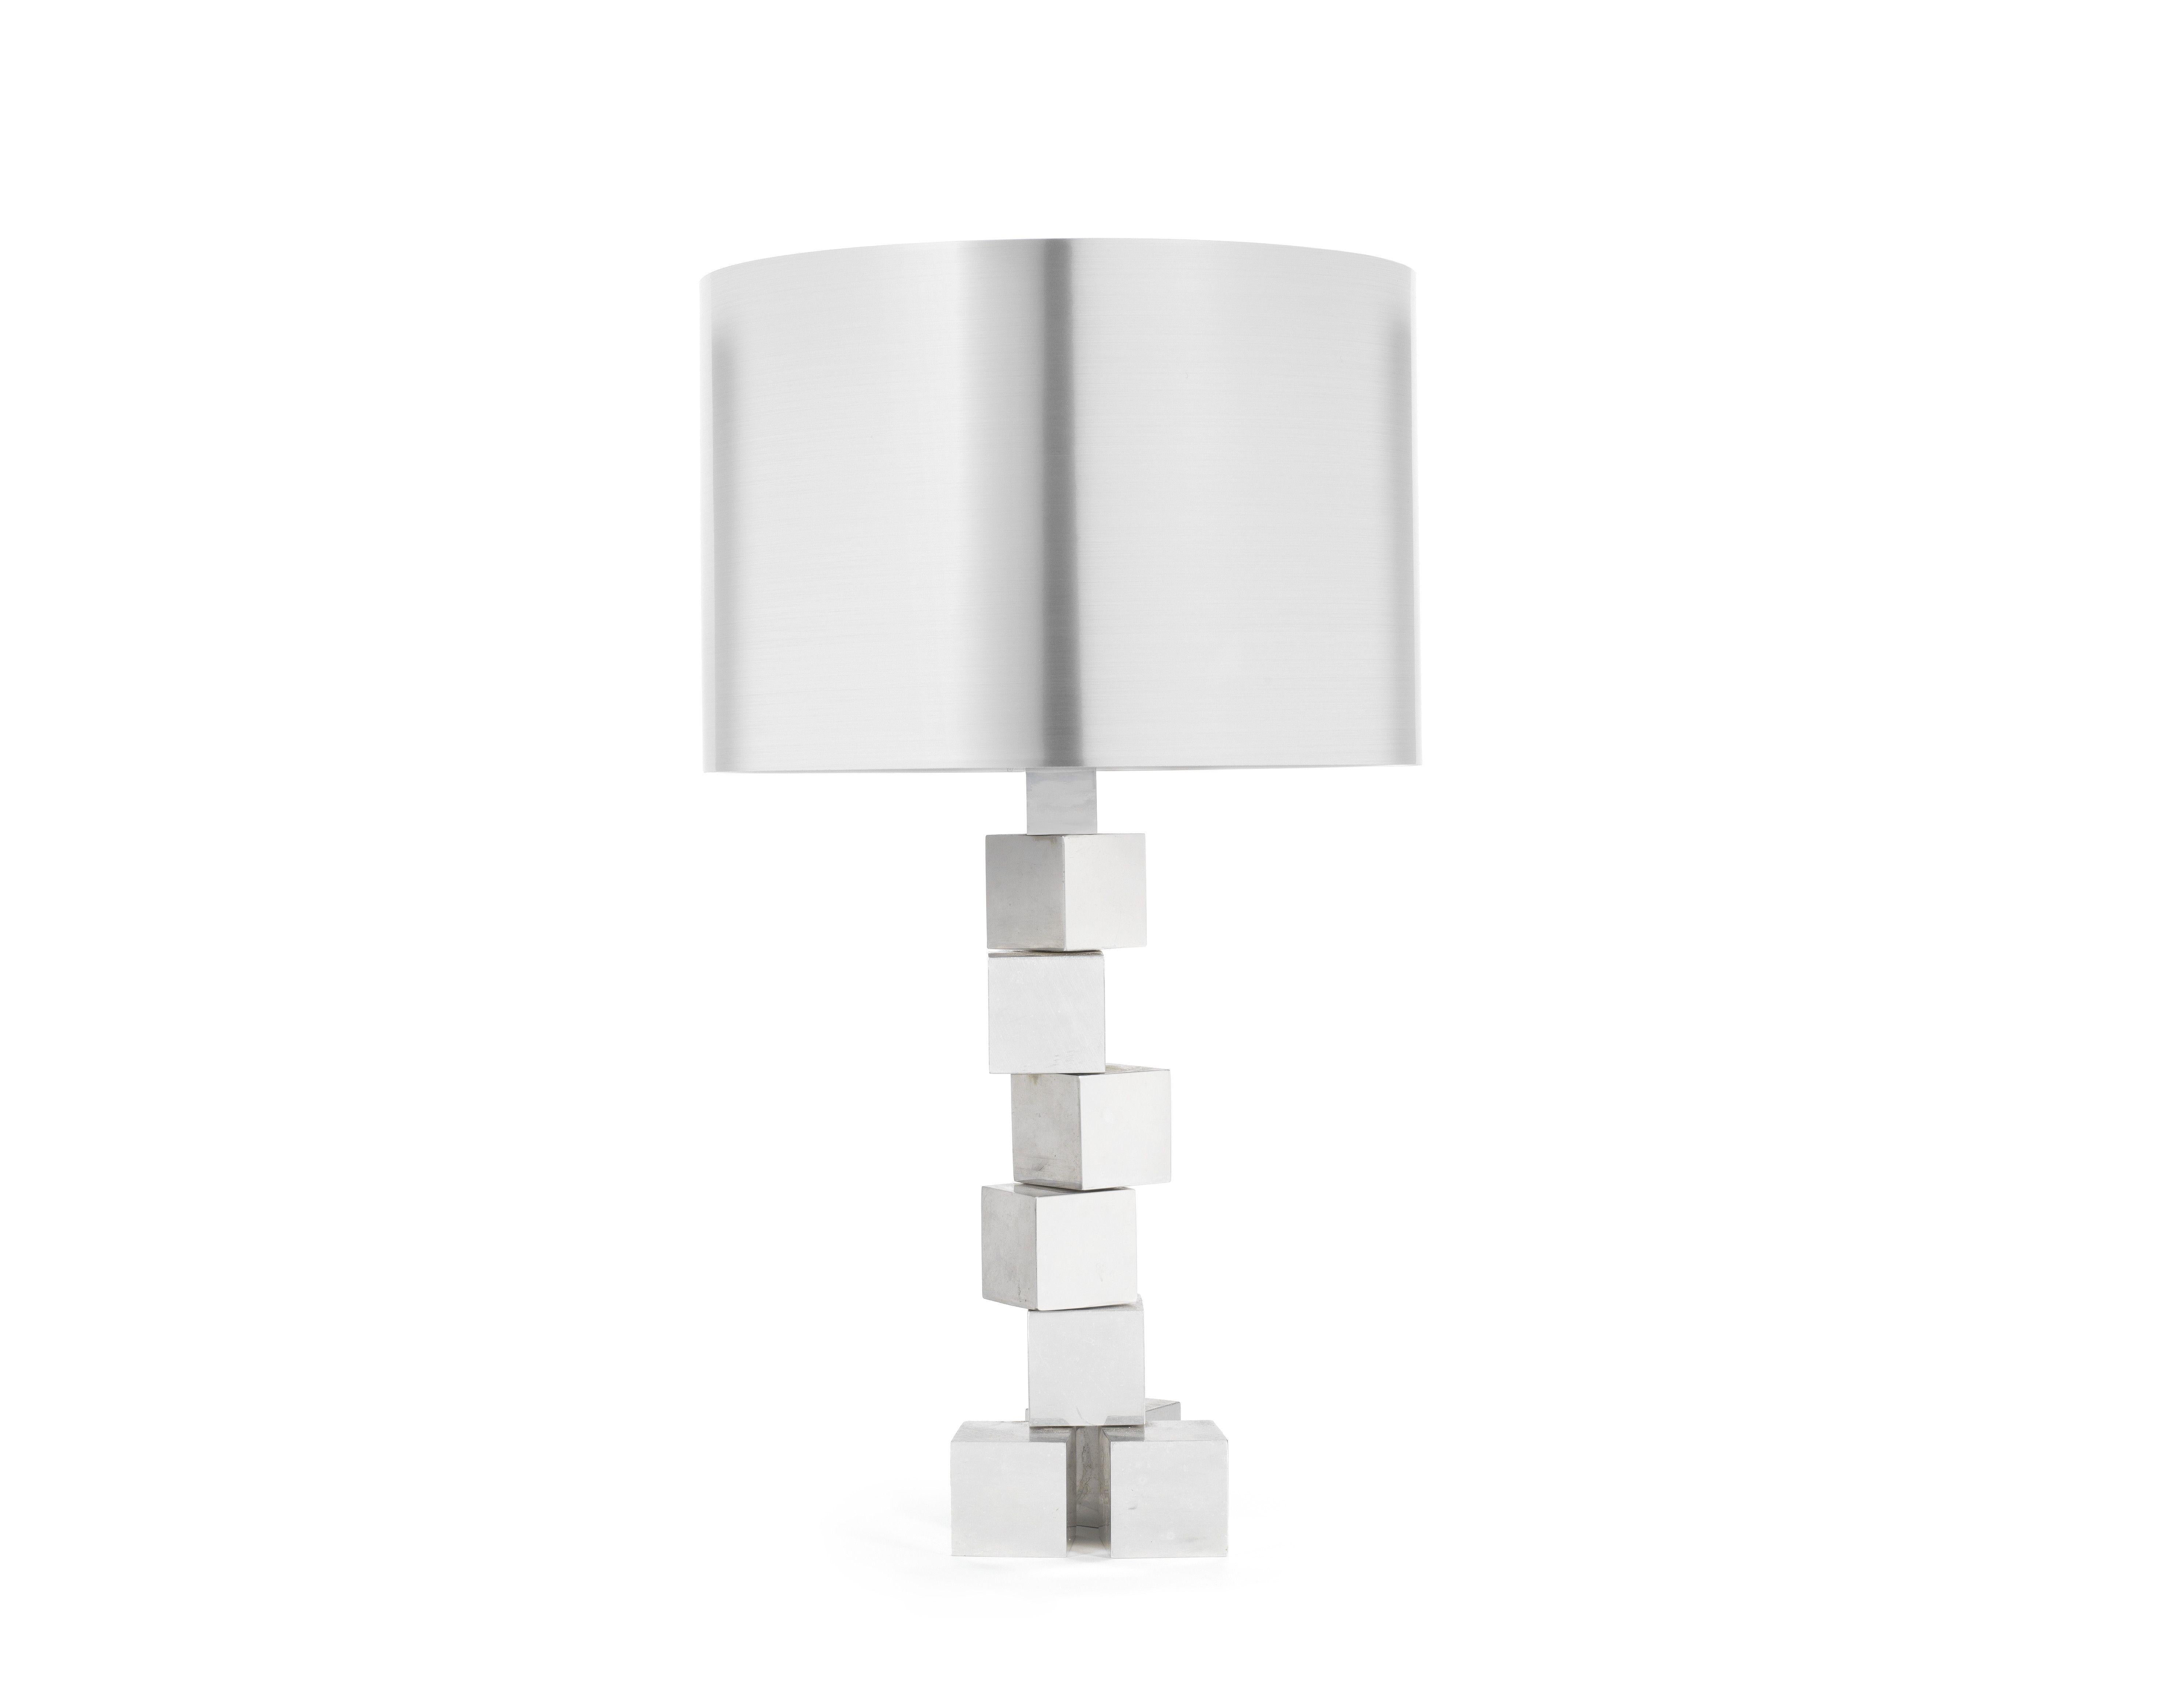 The lamp of chromed metal, the five upper cubes being adjustable and can partially rotate depending on preference, with a European plug fitting.
Each foot stamped 'RJ' underneath, height including shade 43cm.

 